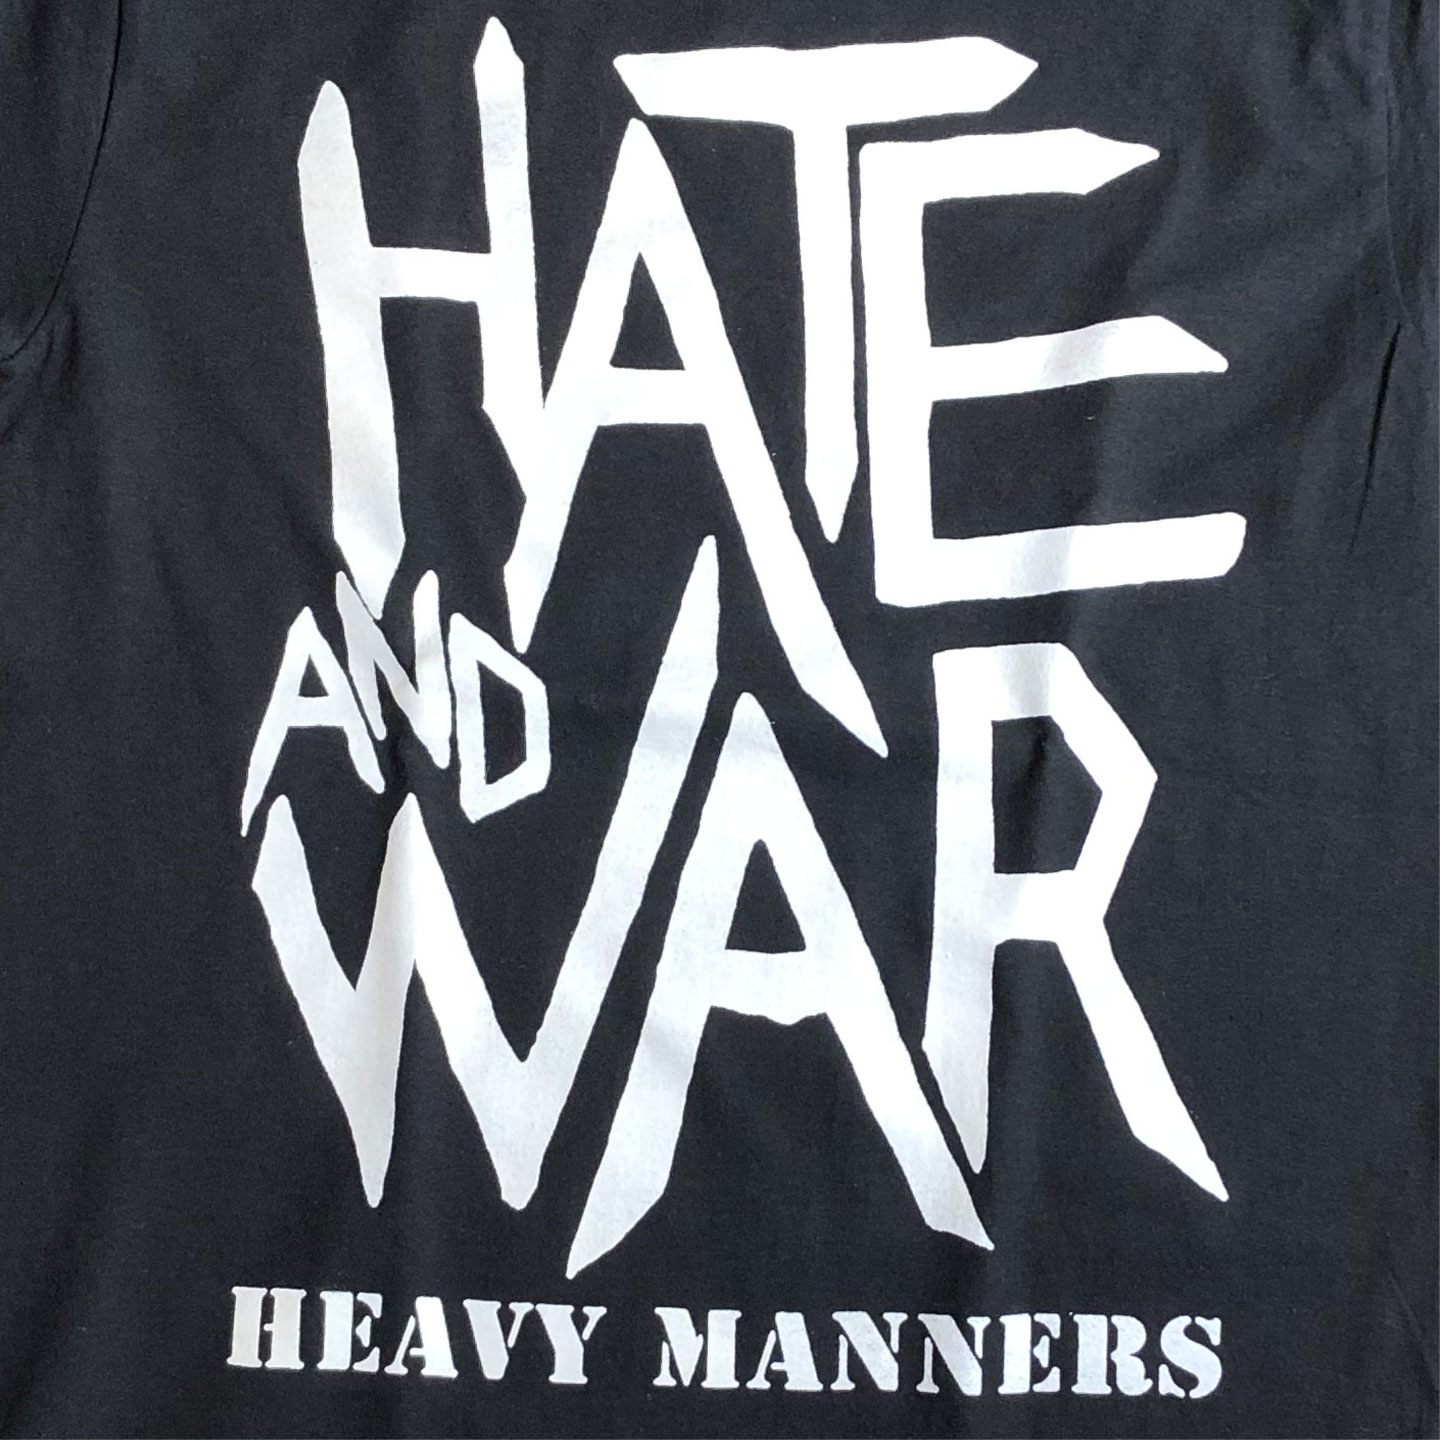 THE CLASH Tシャツ HATE AND WAR